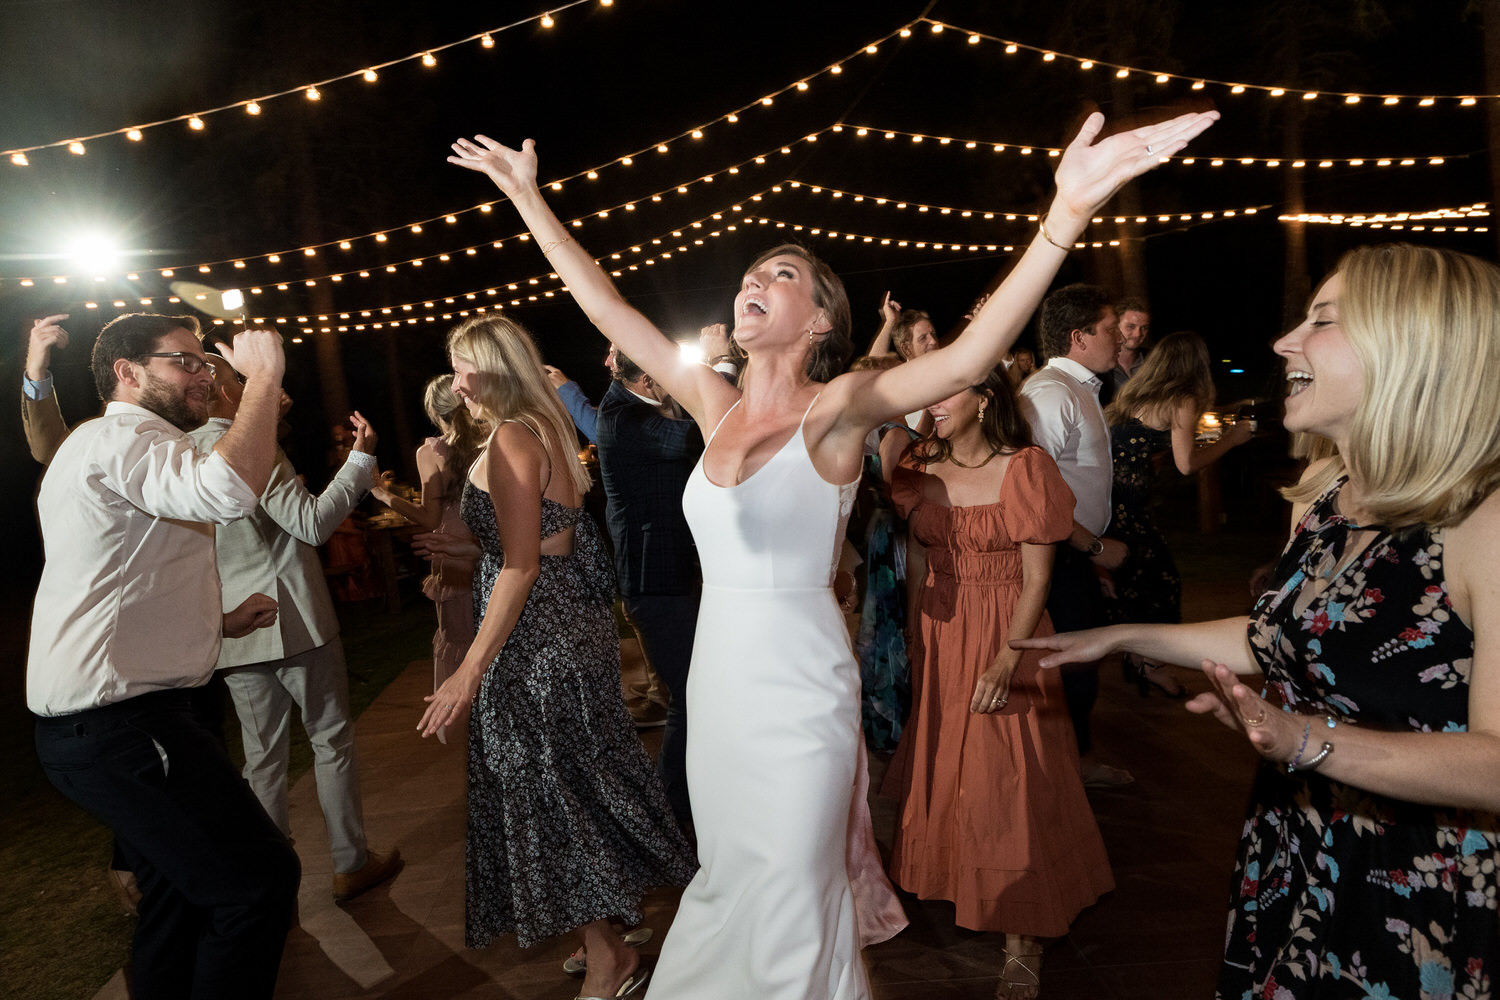 A bride throws her arms up in the air to celebrate her wedding reception at Chalet View Lodge near Blairsden-Graeagle.